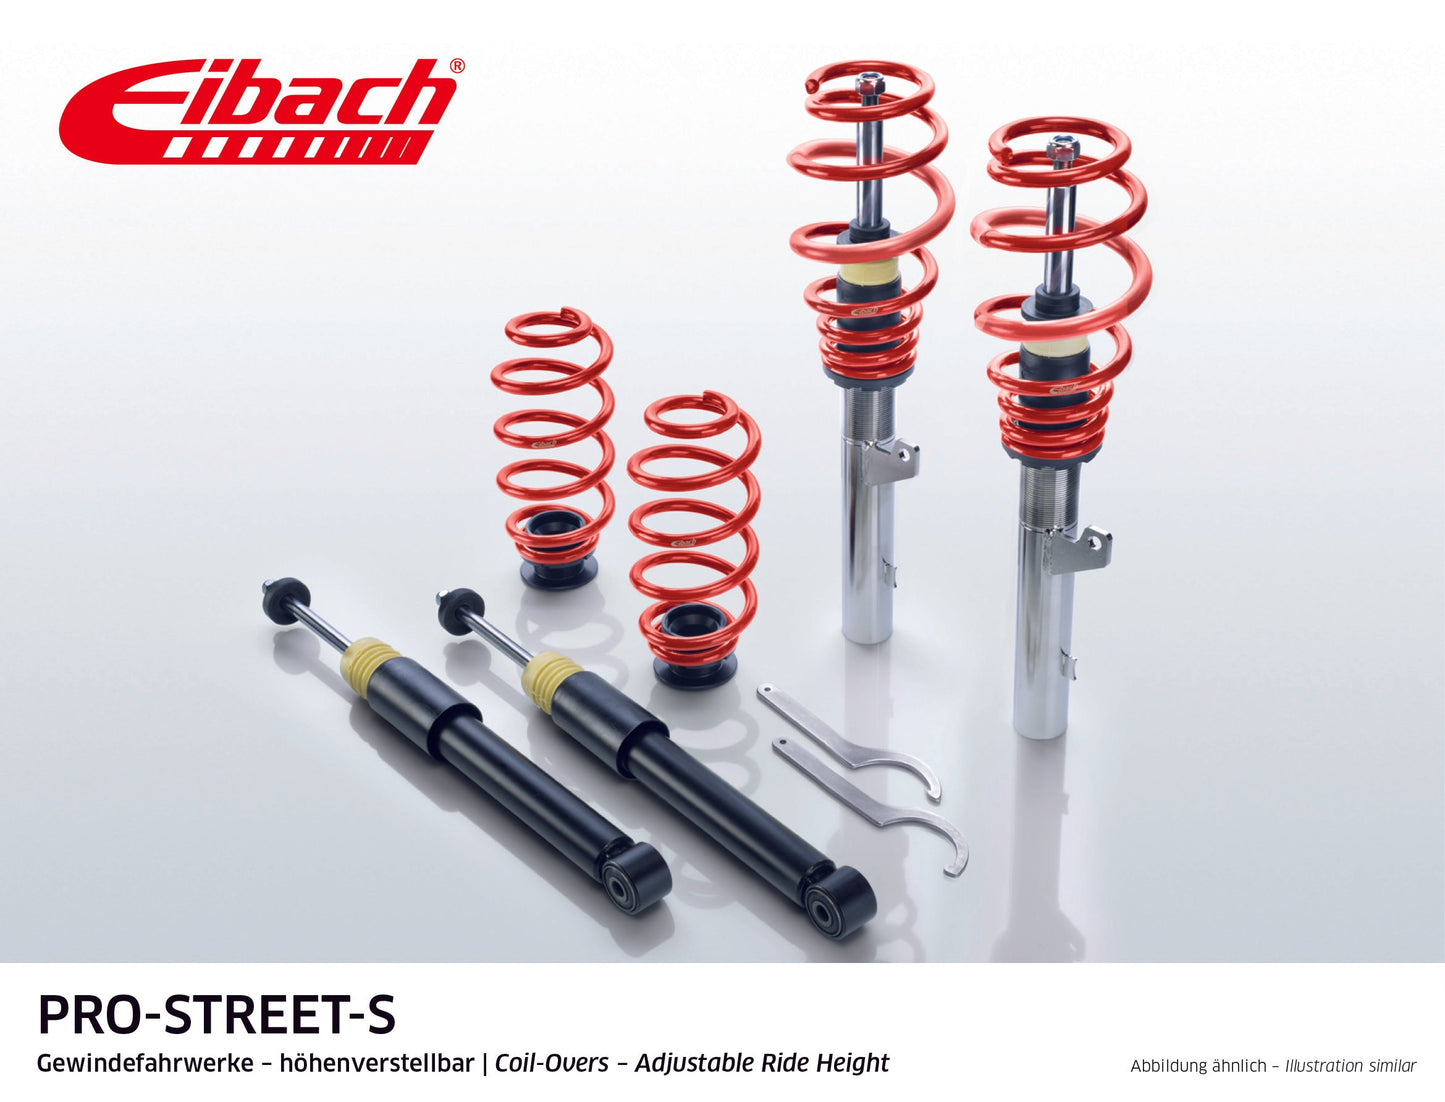 Eibach Pro-Street Coilover (PSS65-15-001-01-22) at £1154.55